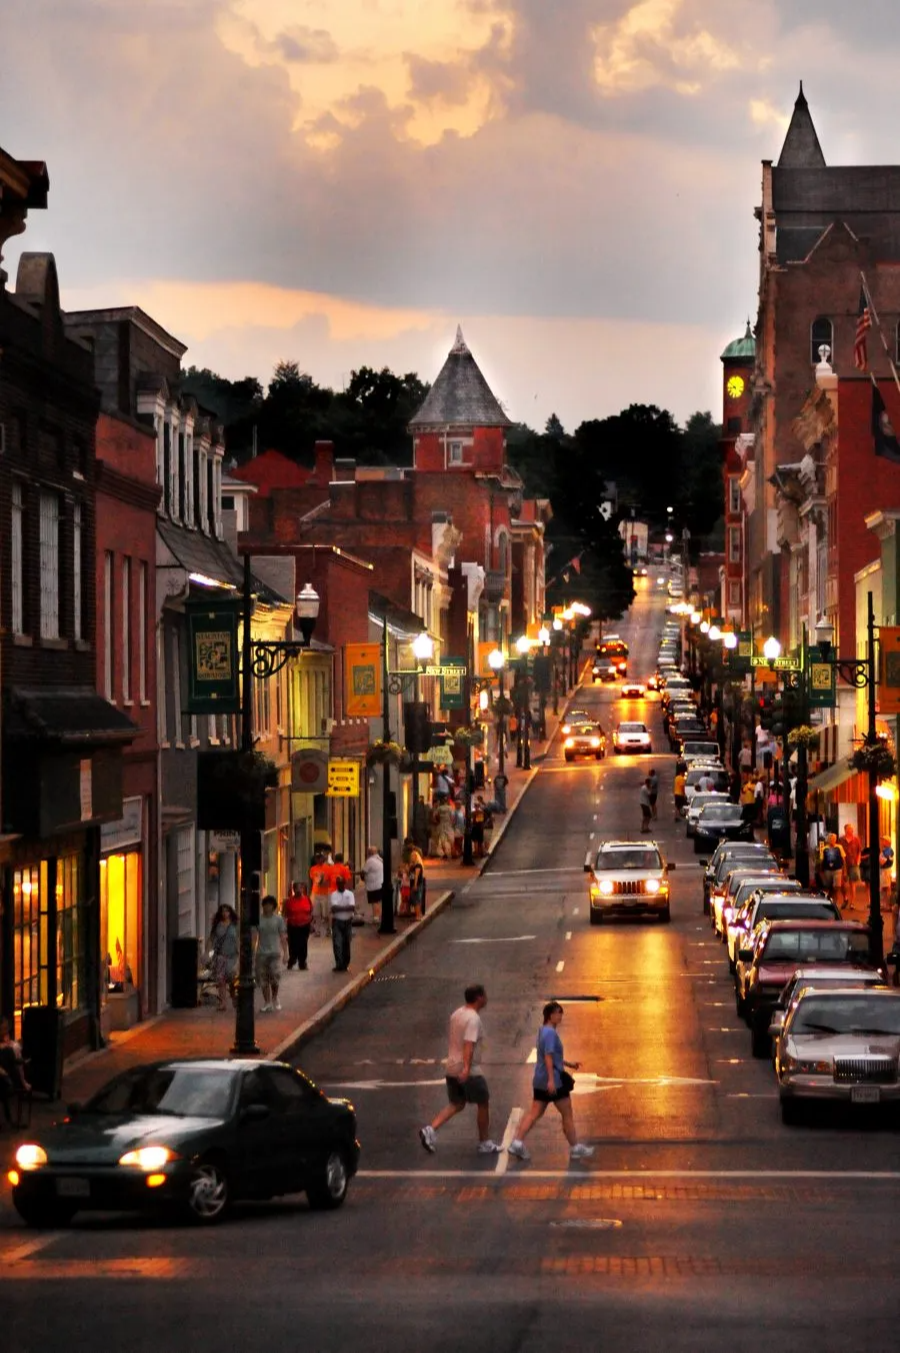 Downtown Staunton at dusk with some city lights on - Photo by Woods Pierce